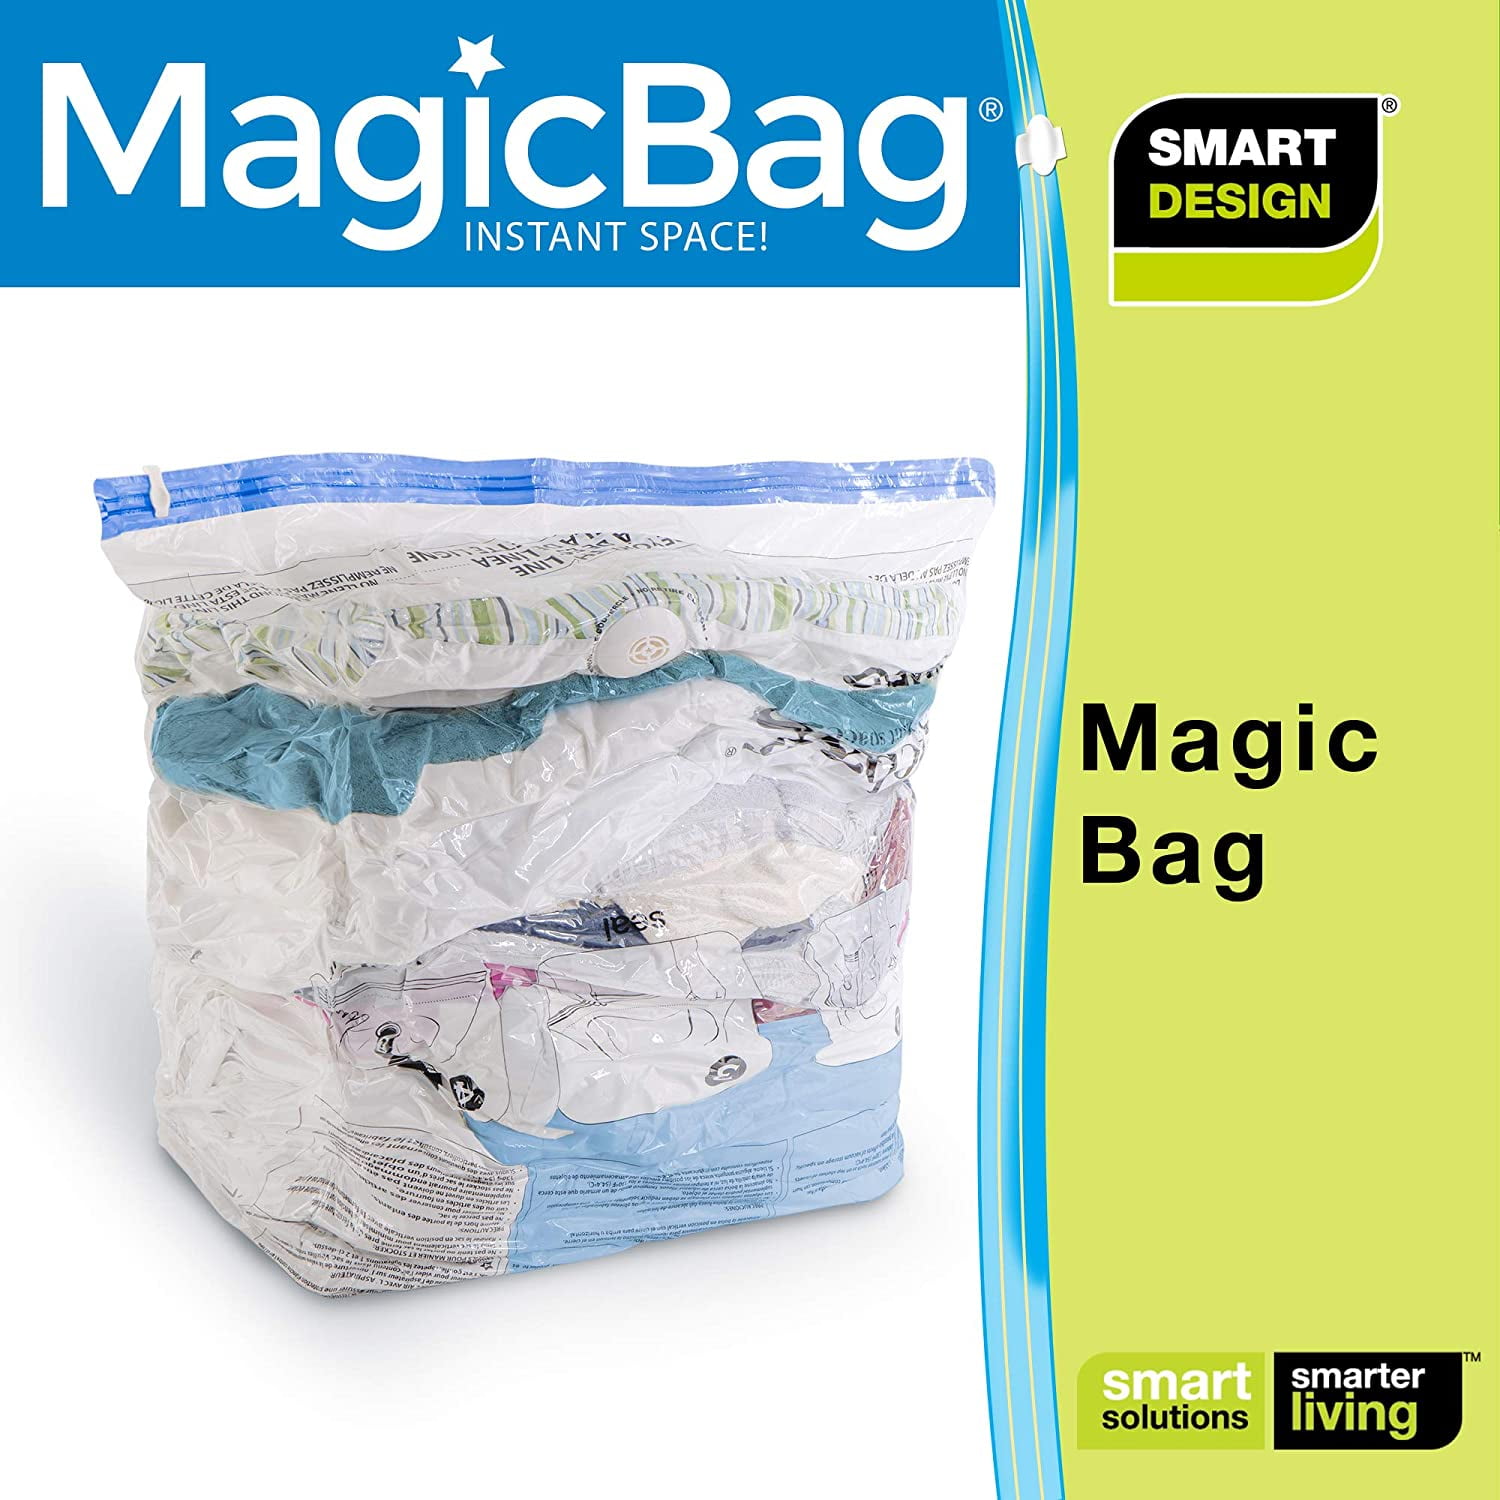 Magicbag Instant Space Saver Storage - 1 Jumbo Tote with 4 Large Flat Compression Bags - Clear